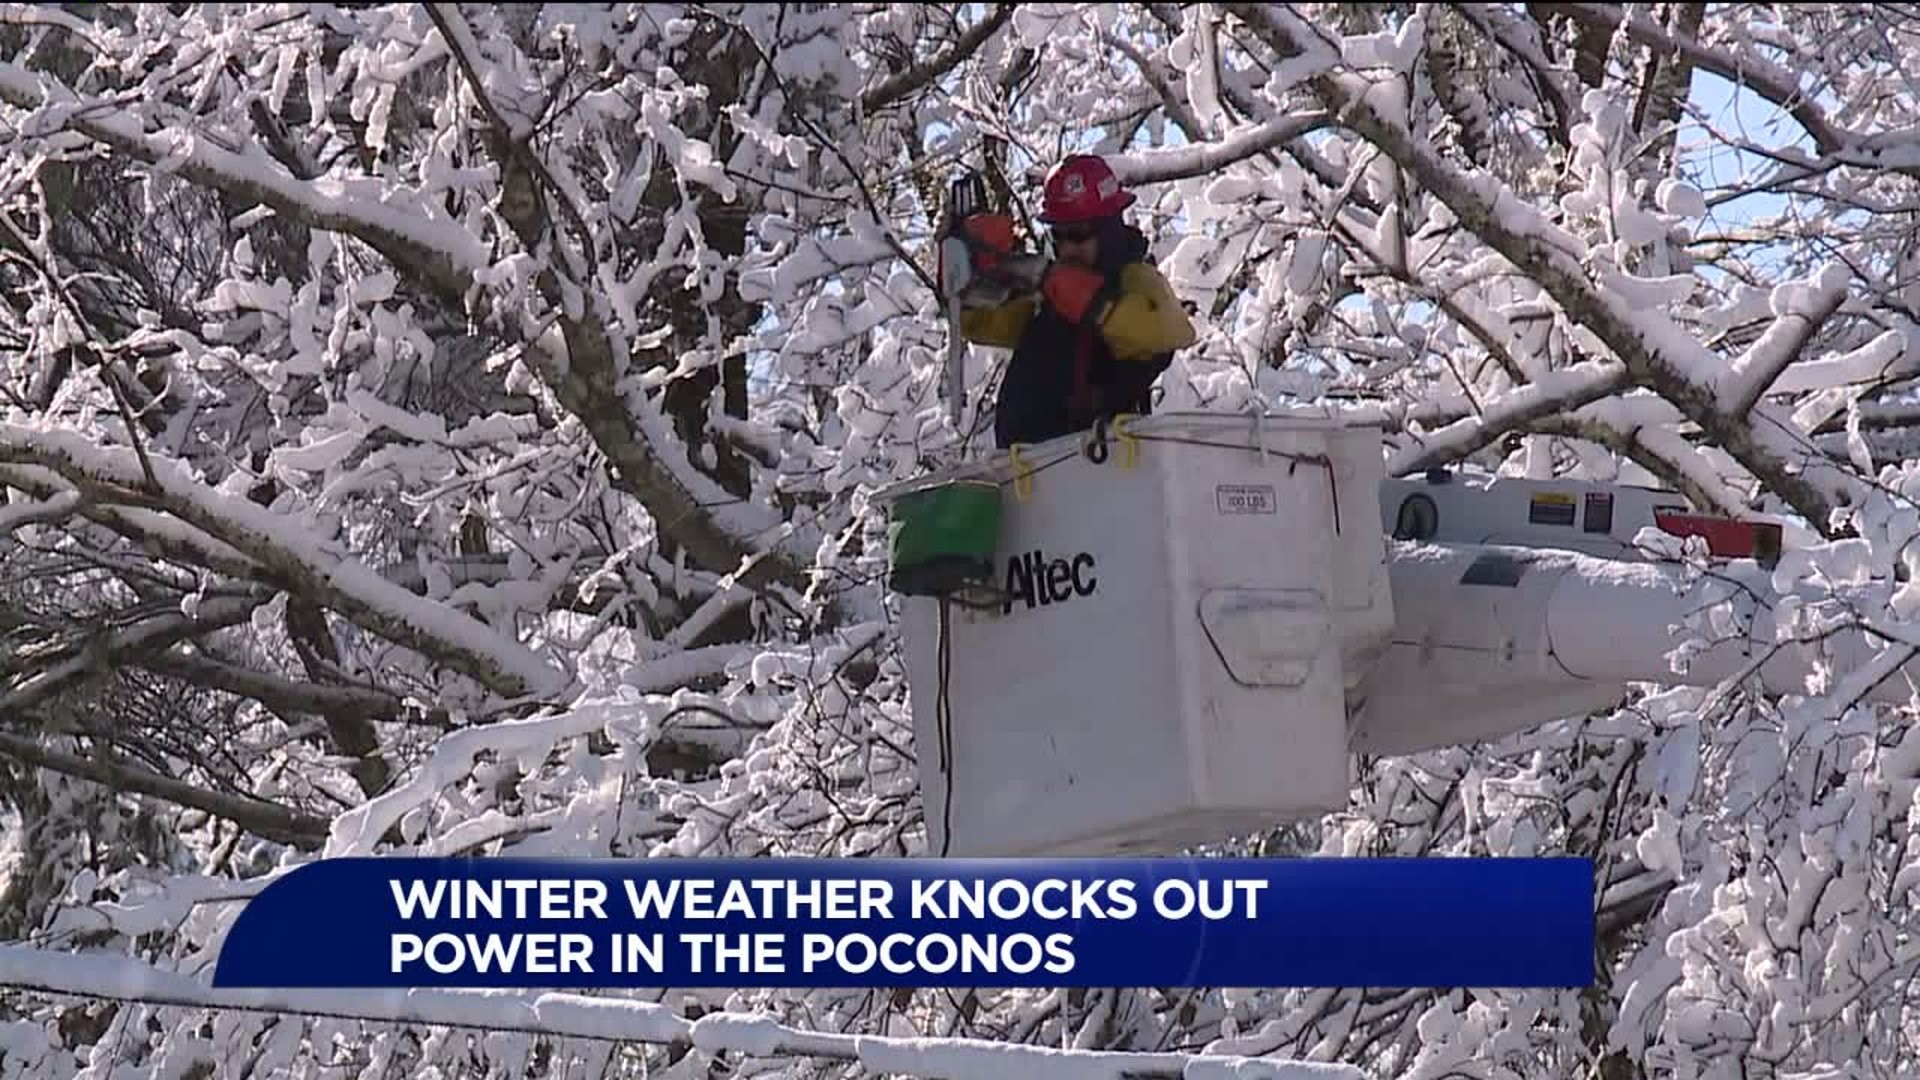 Wintry Weather Knocks Out Power in the Poconos